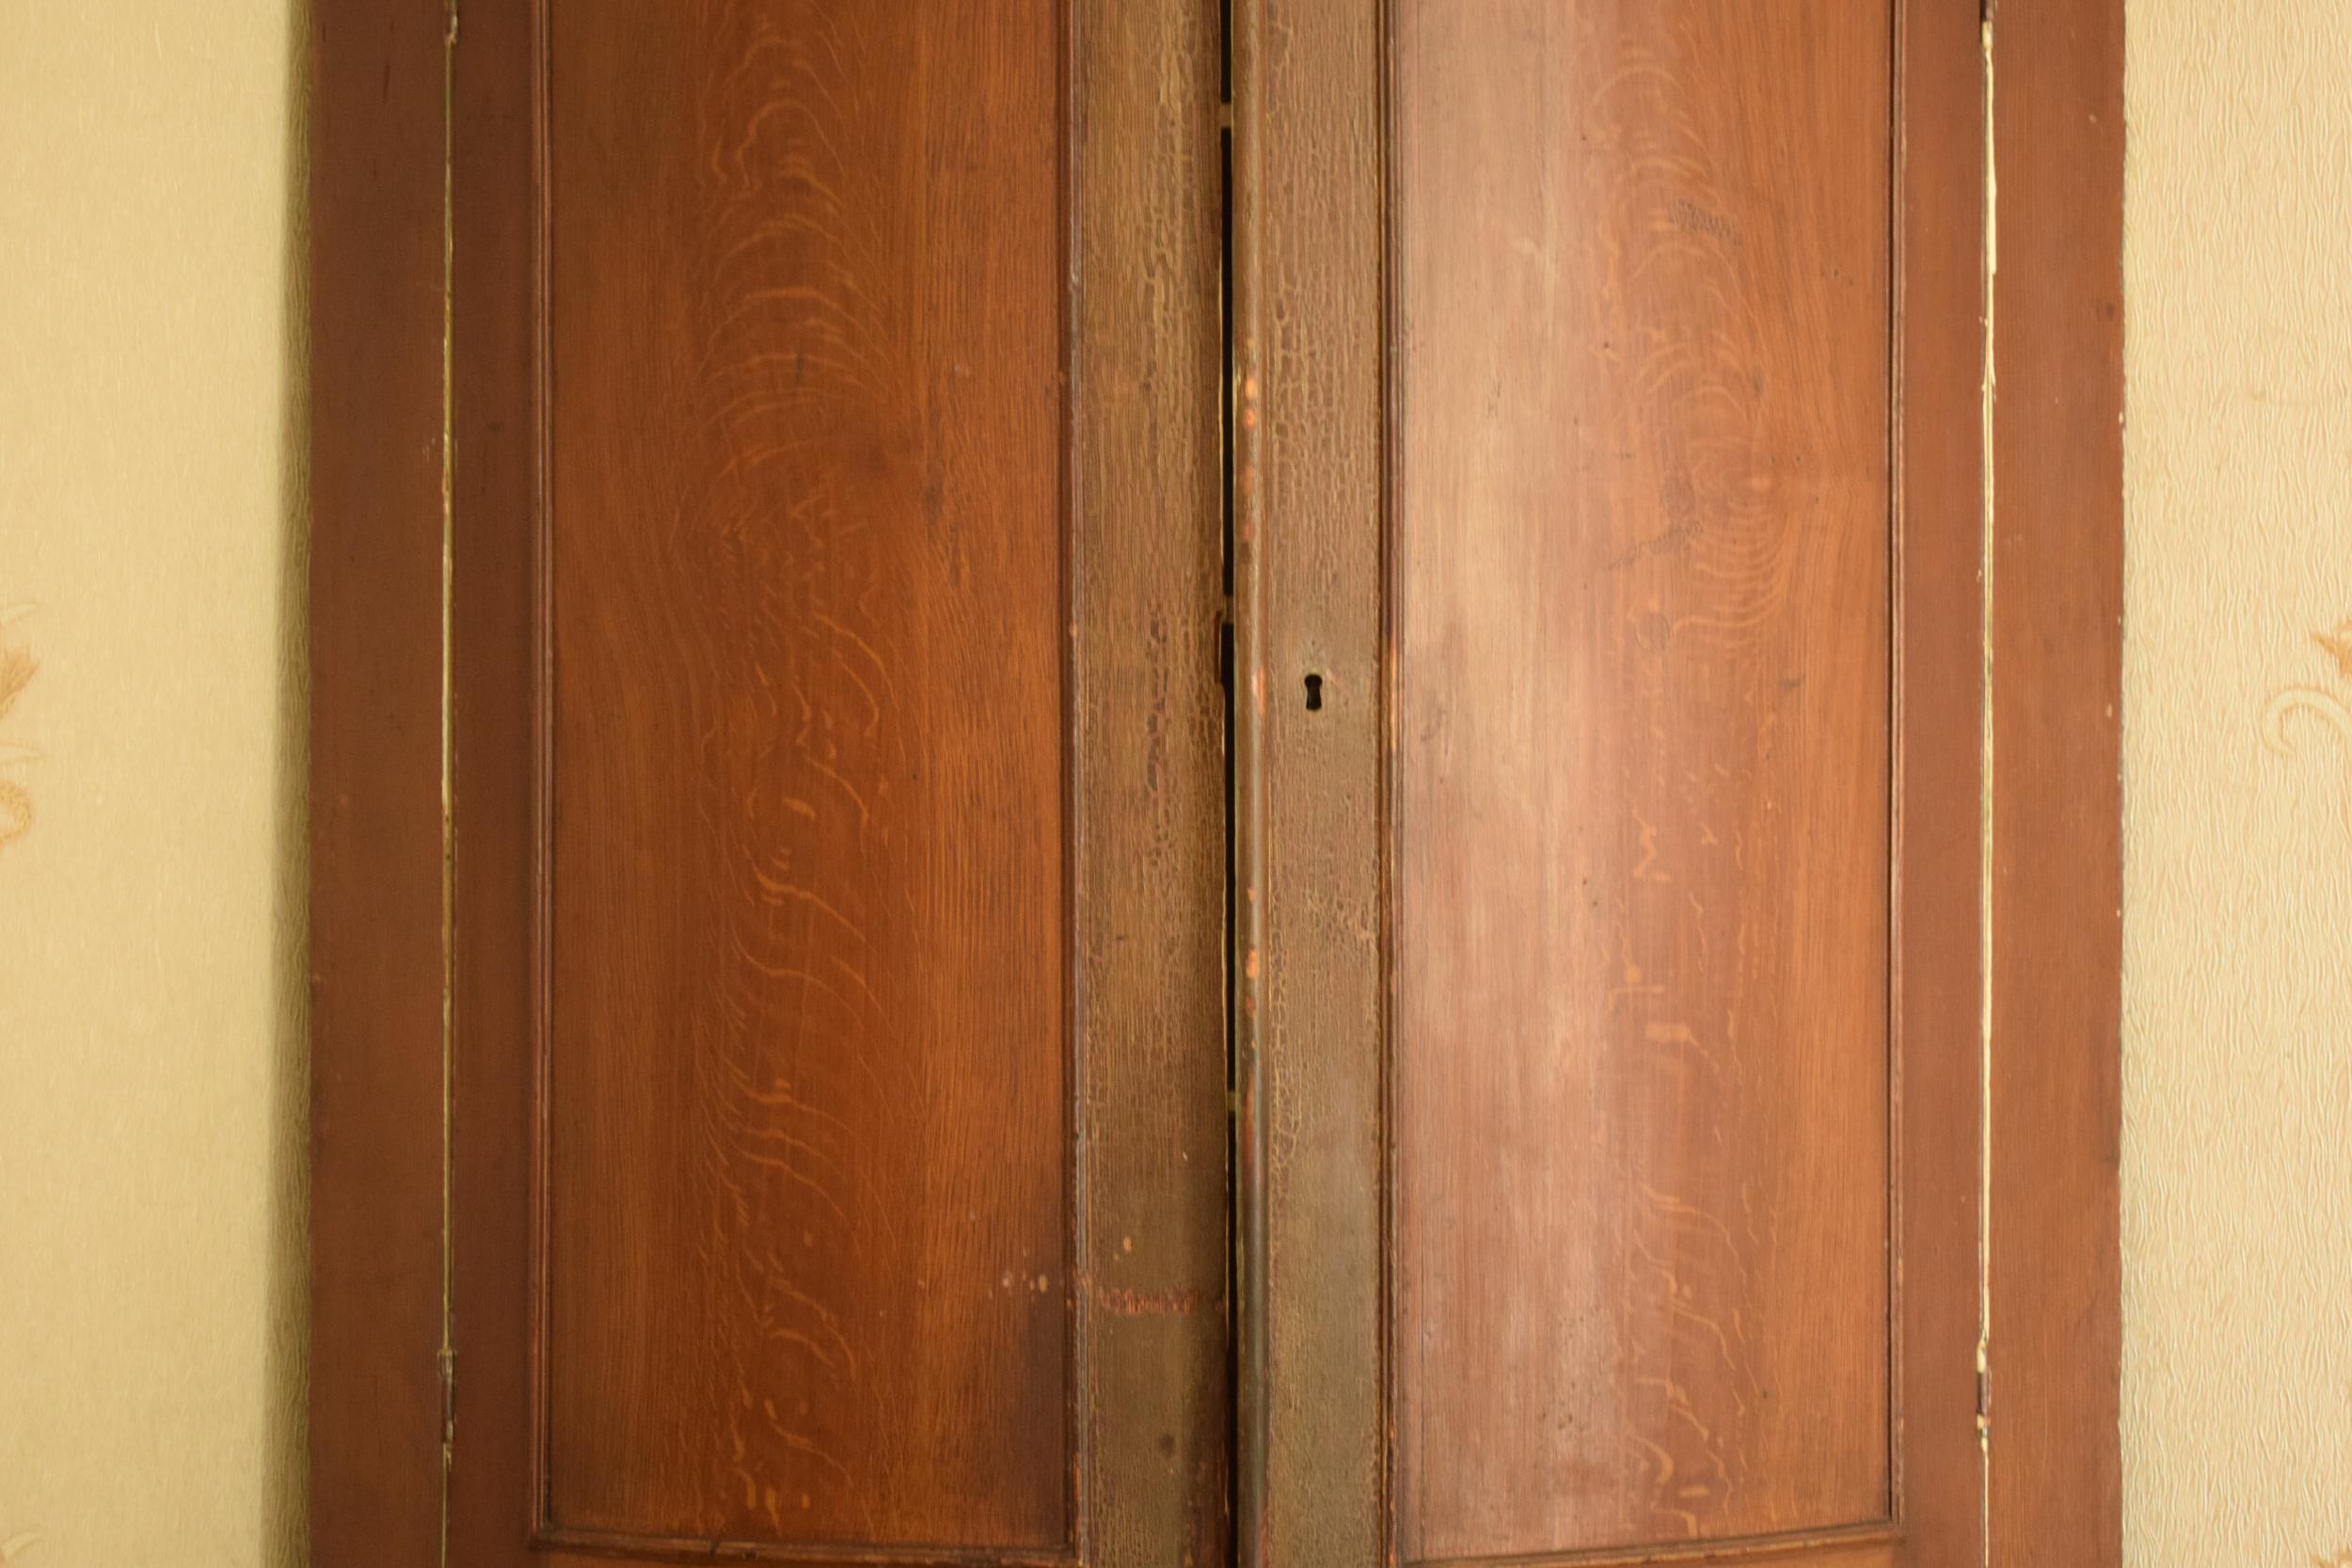 19th century freestanding double corner cupboard In good functional condition with some signs of - Image 3 of 16